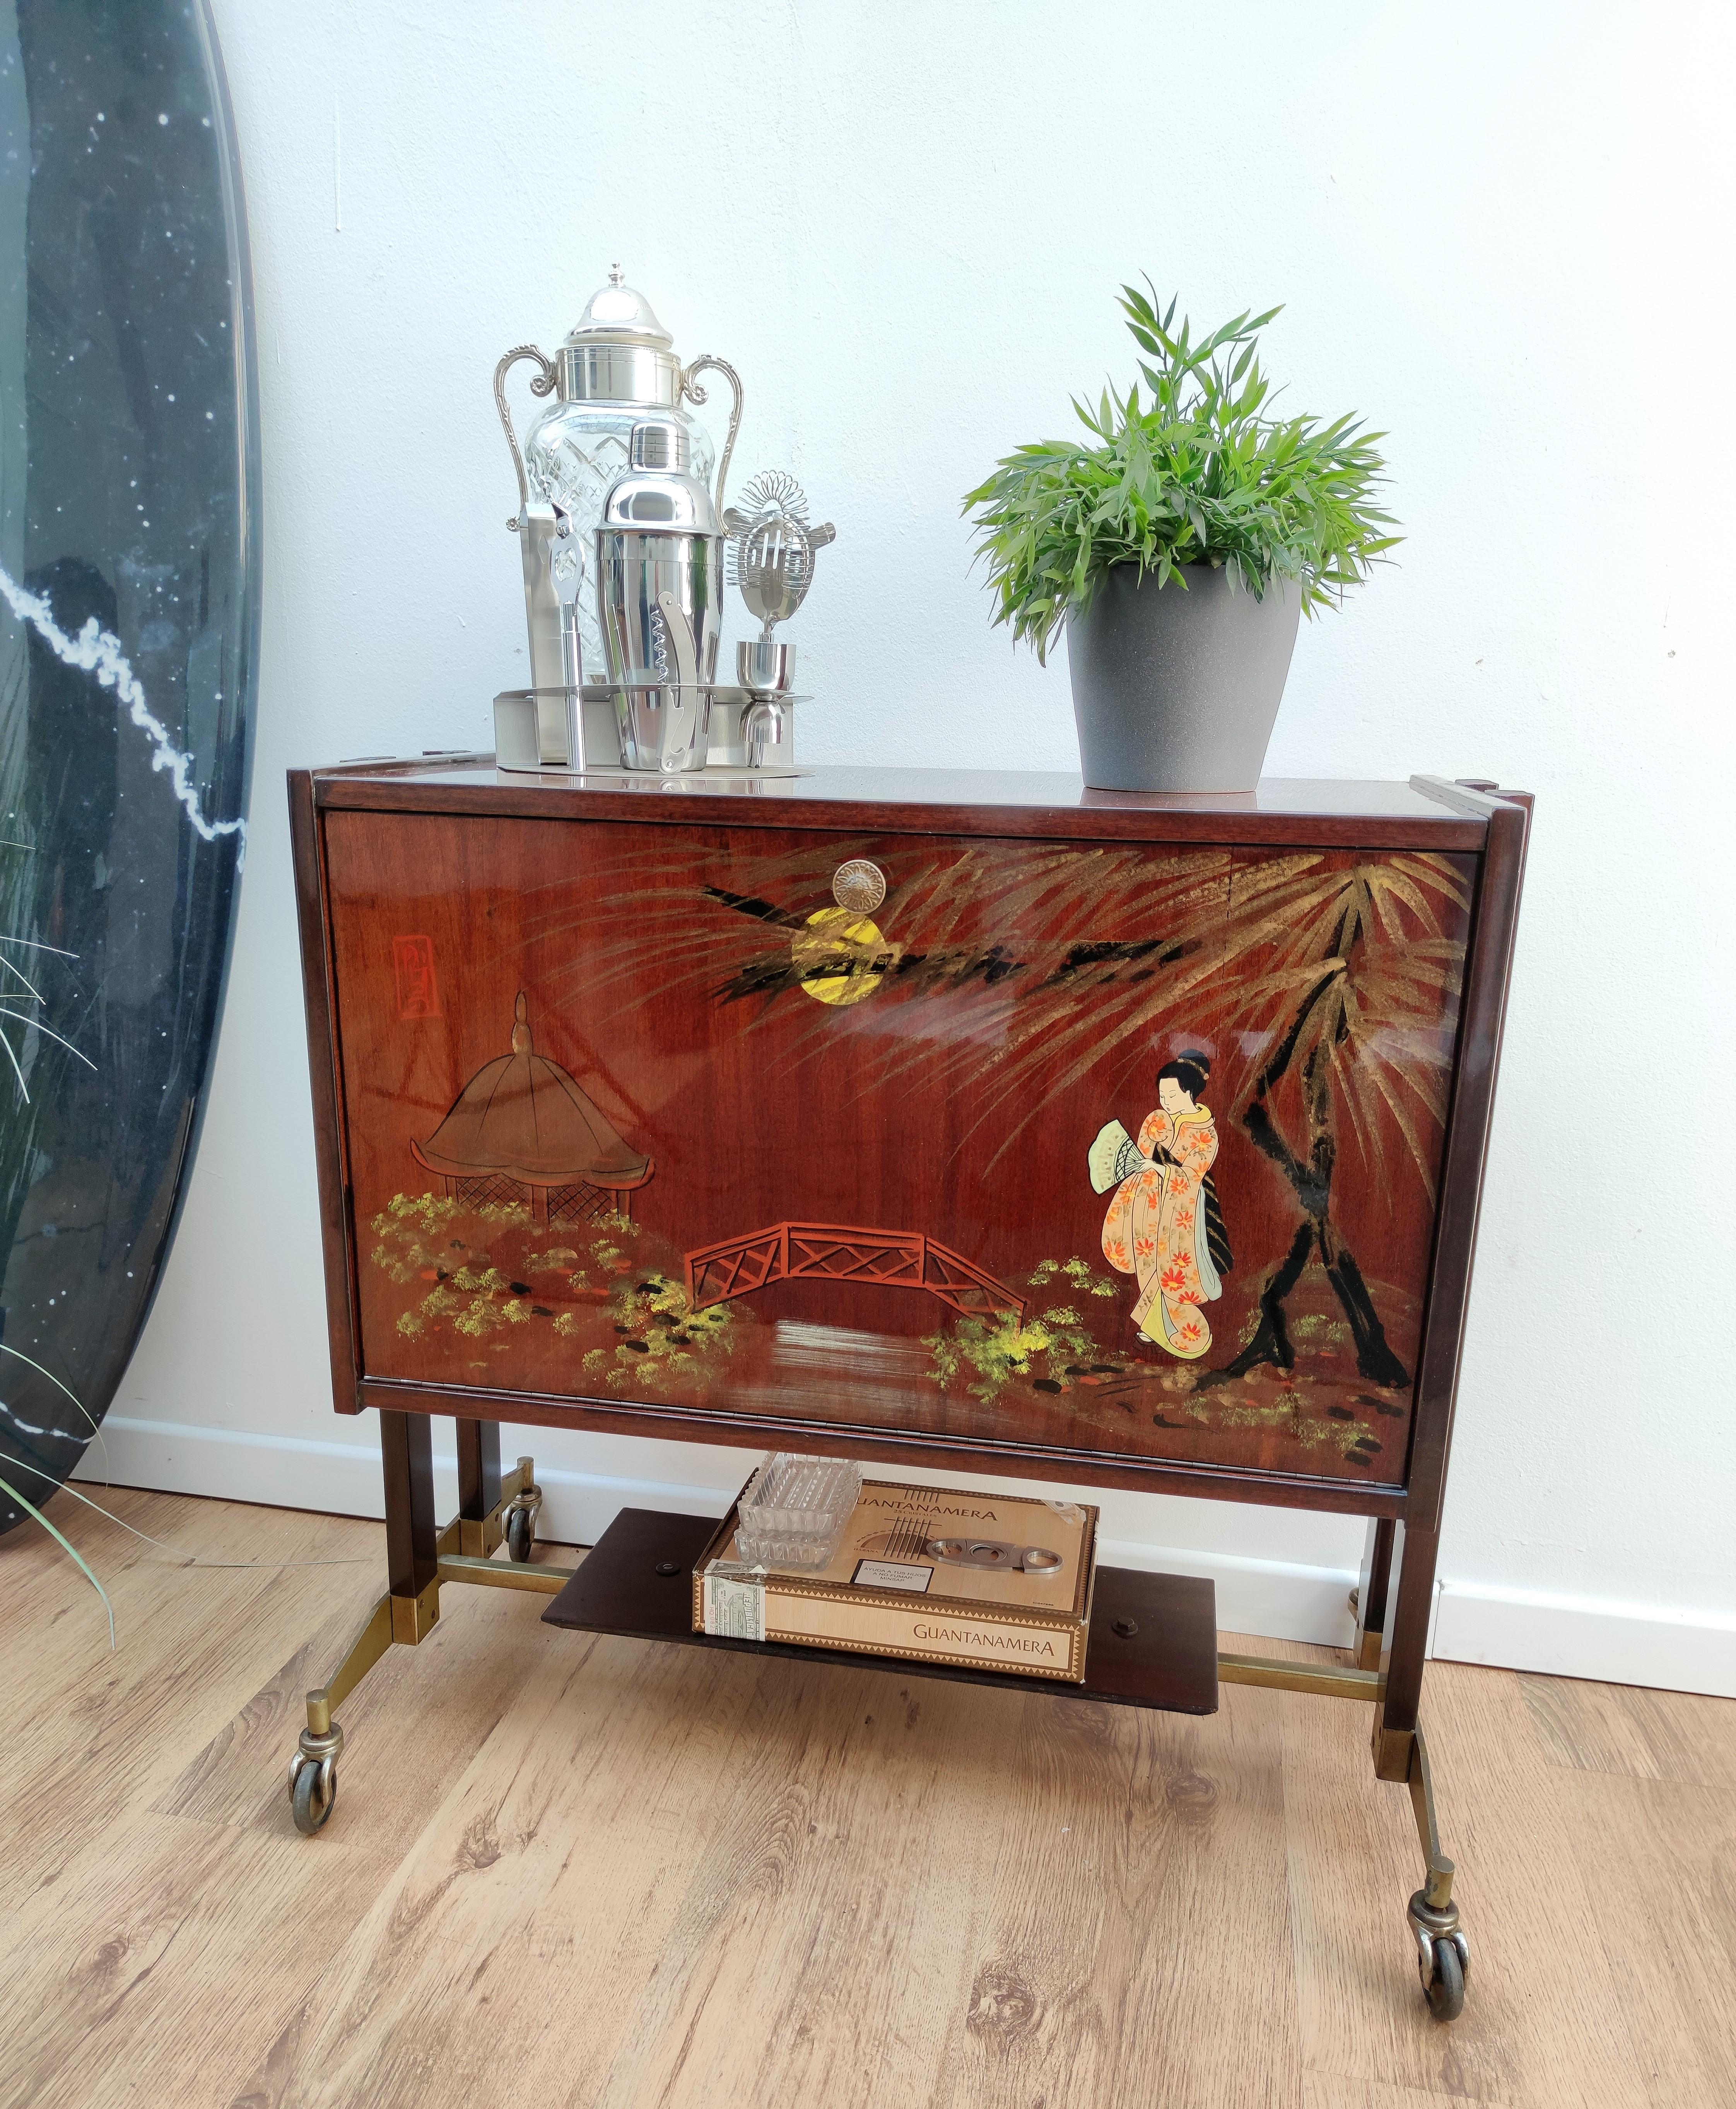 Very elegant Italian Art Deco Mid-Century Modern dry bar cabinet cart characterized by its original Asian themed painted front wood pull-out tilt door with interior part in mirror glass, standing on its antique brass wheels.

This charming piece